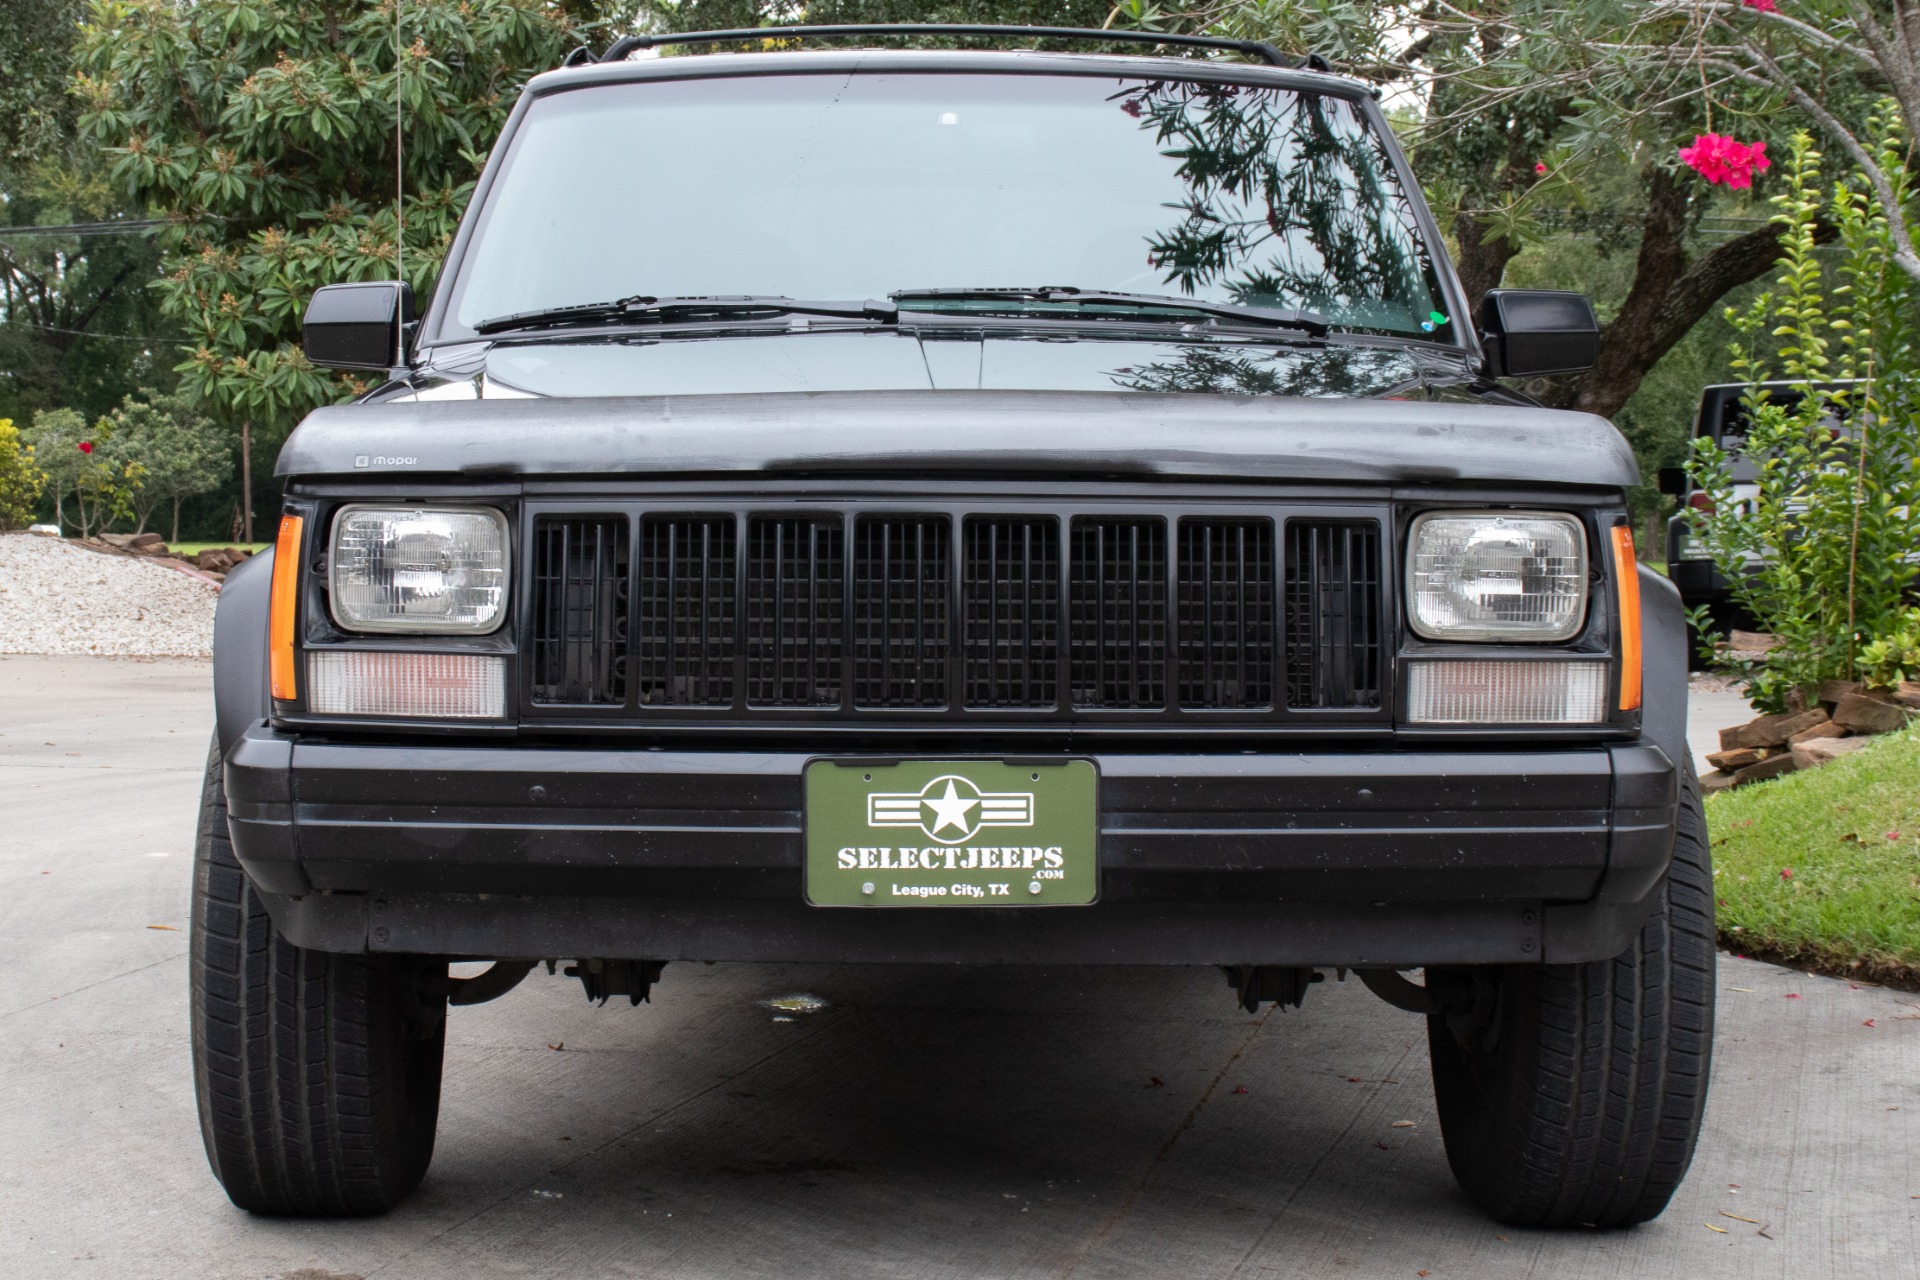 Used-1996-Jeep-Cherokee-4dr-Sport